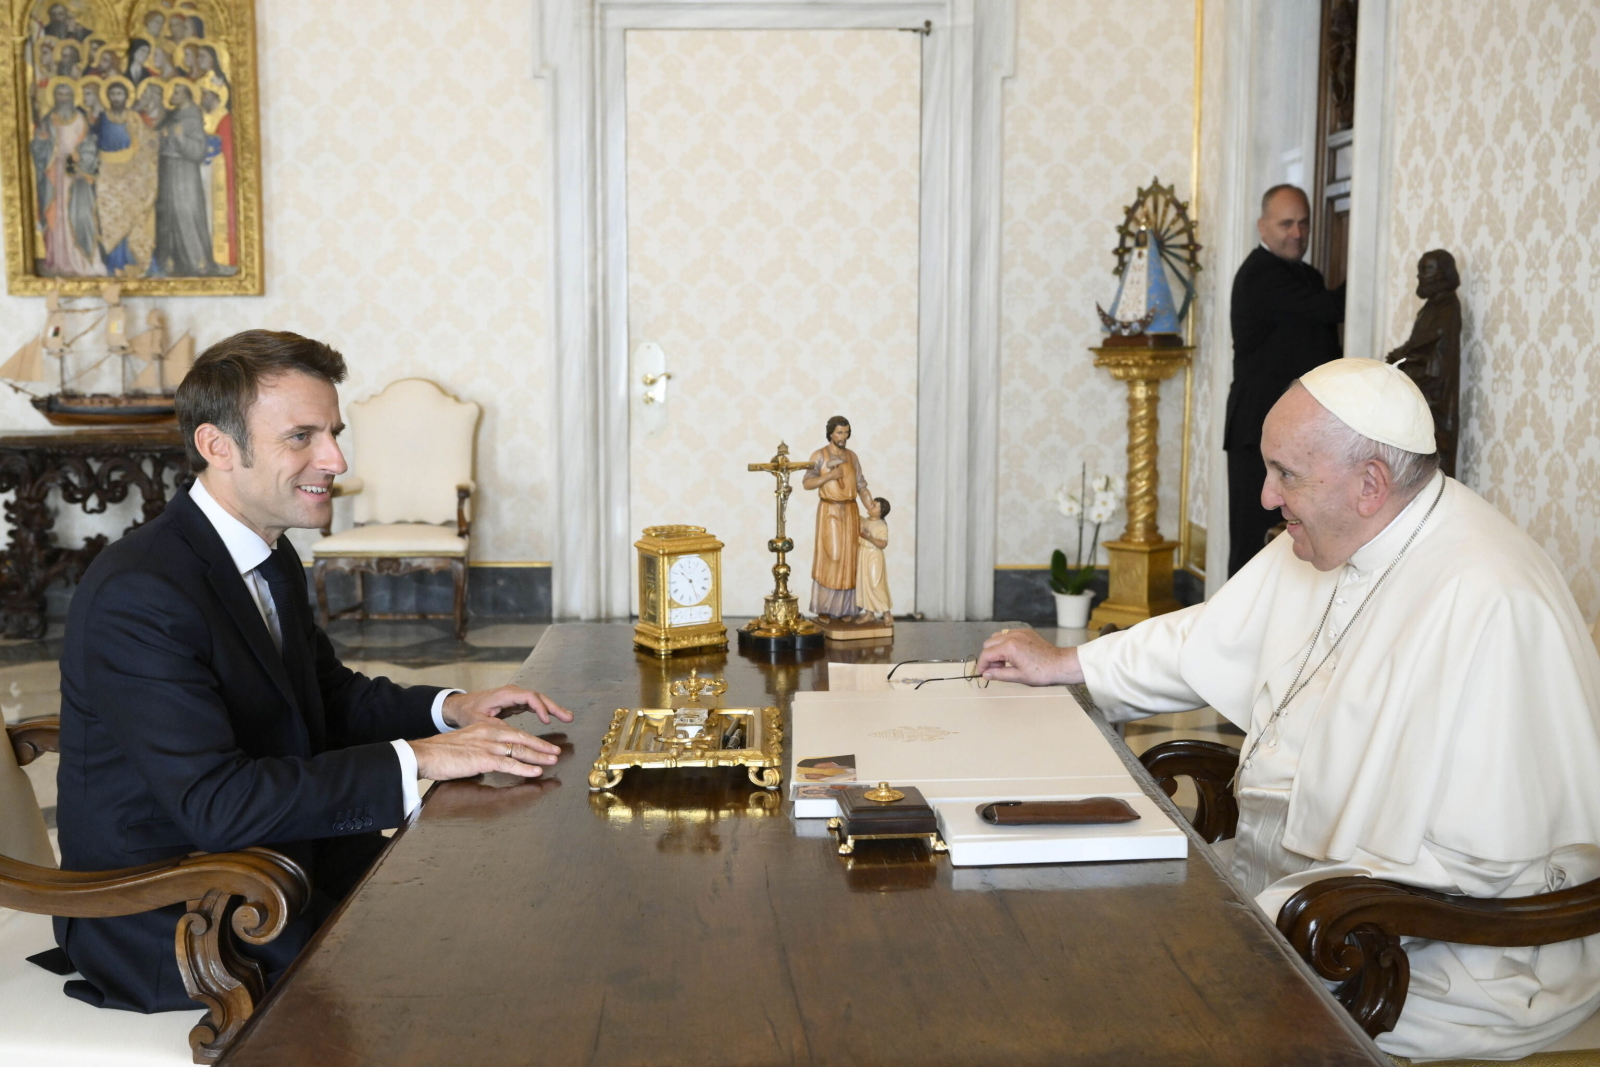 Macron gave the Pope a book from Lviv